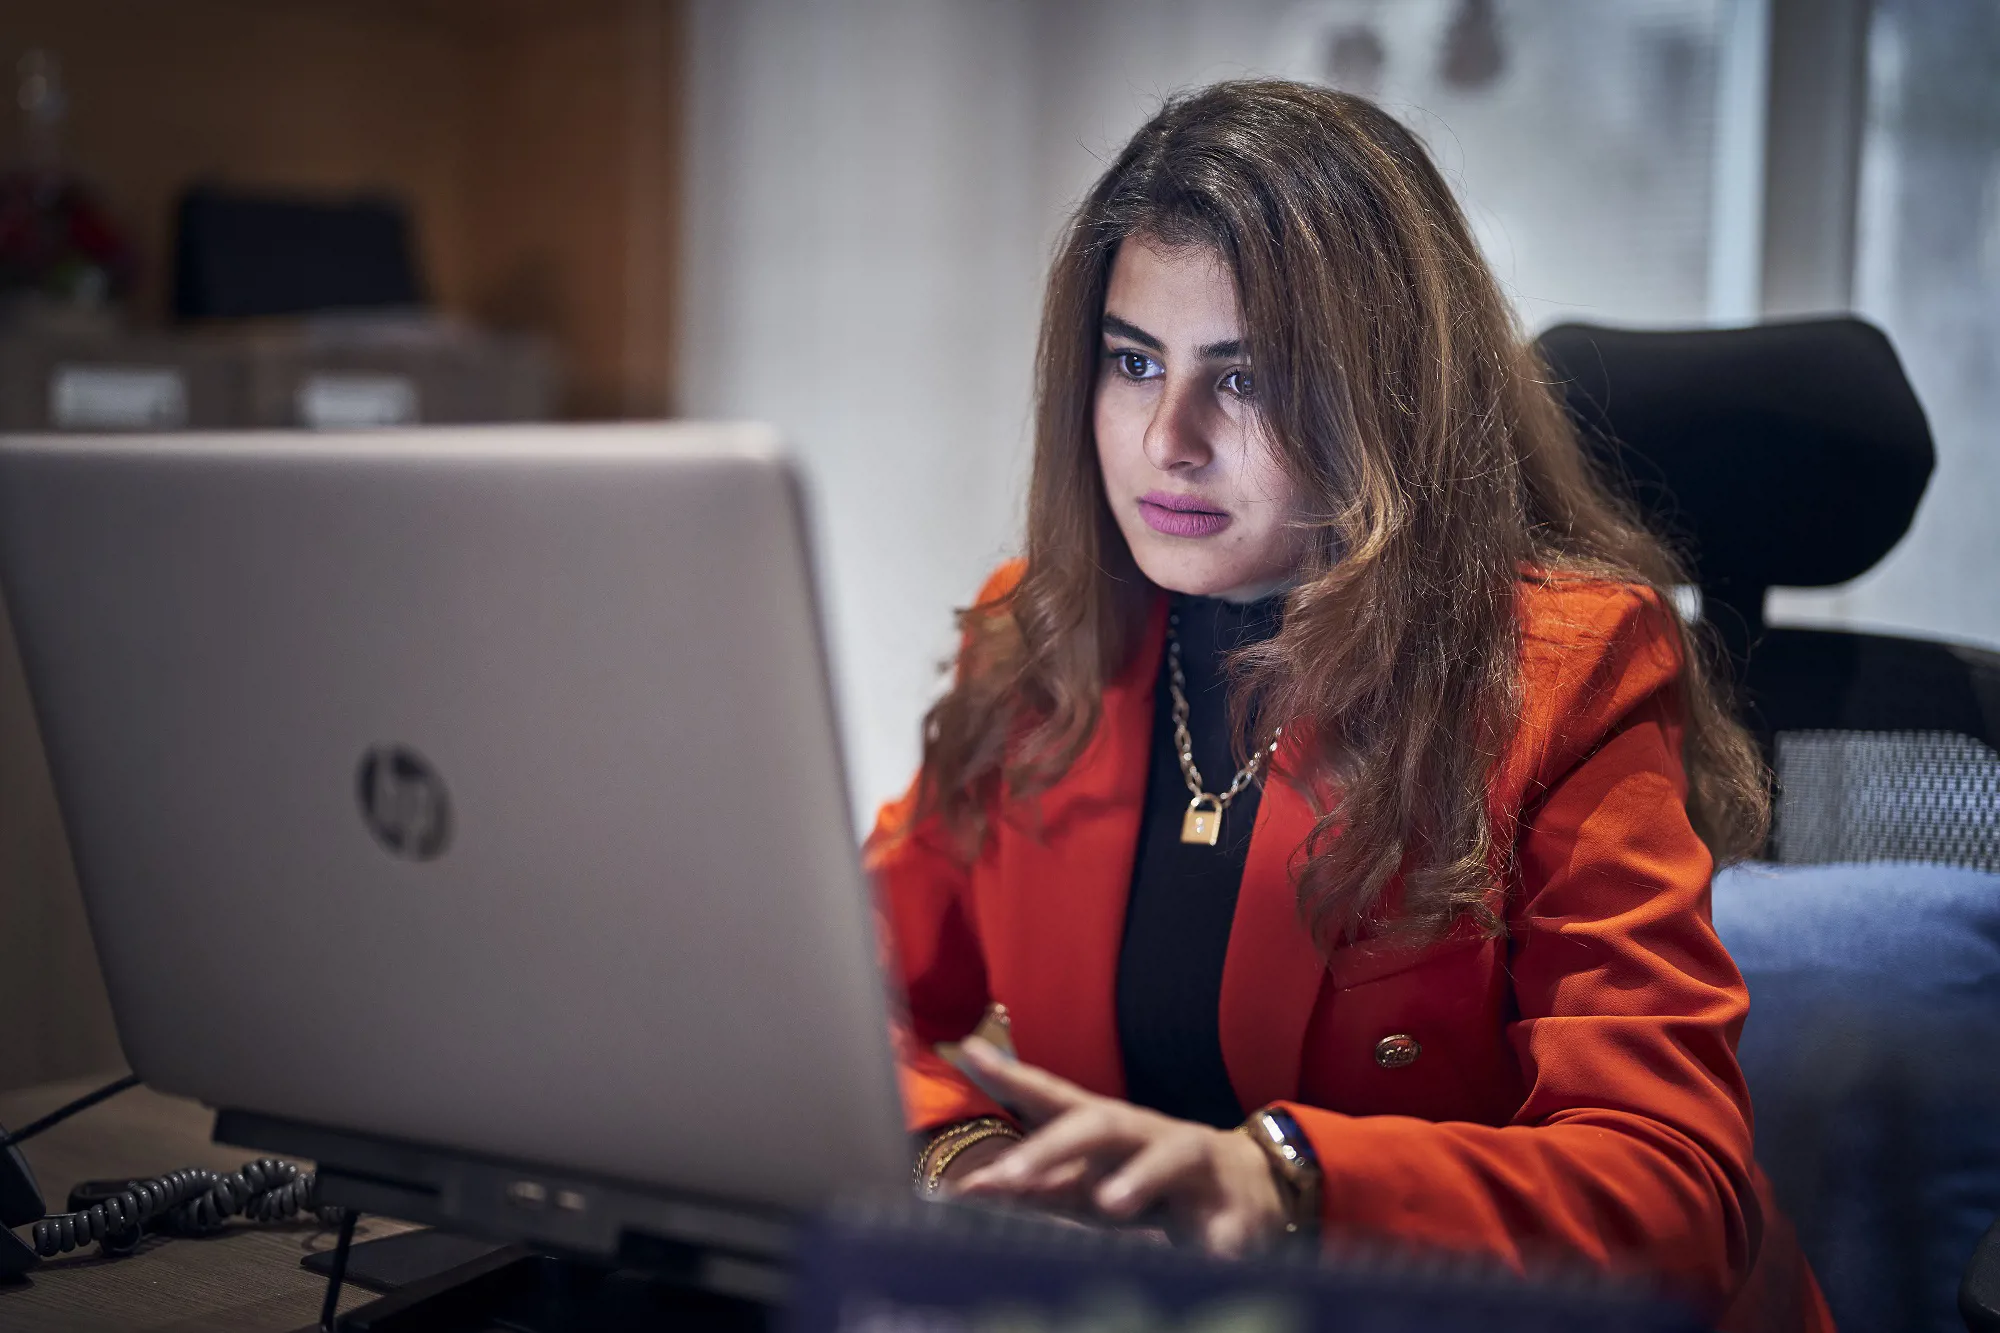 close up of a woman on a laptop in an office